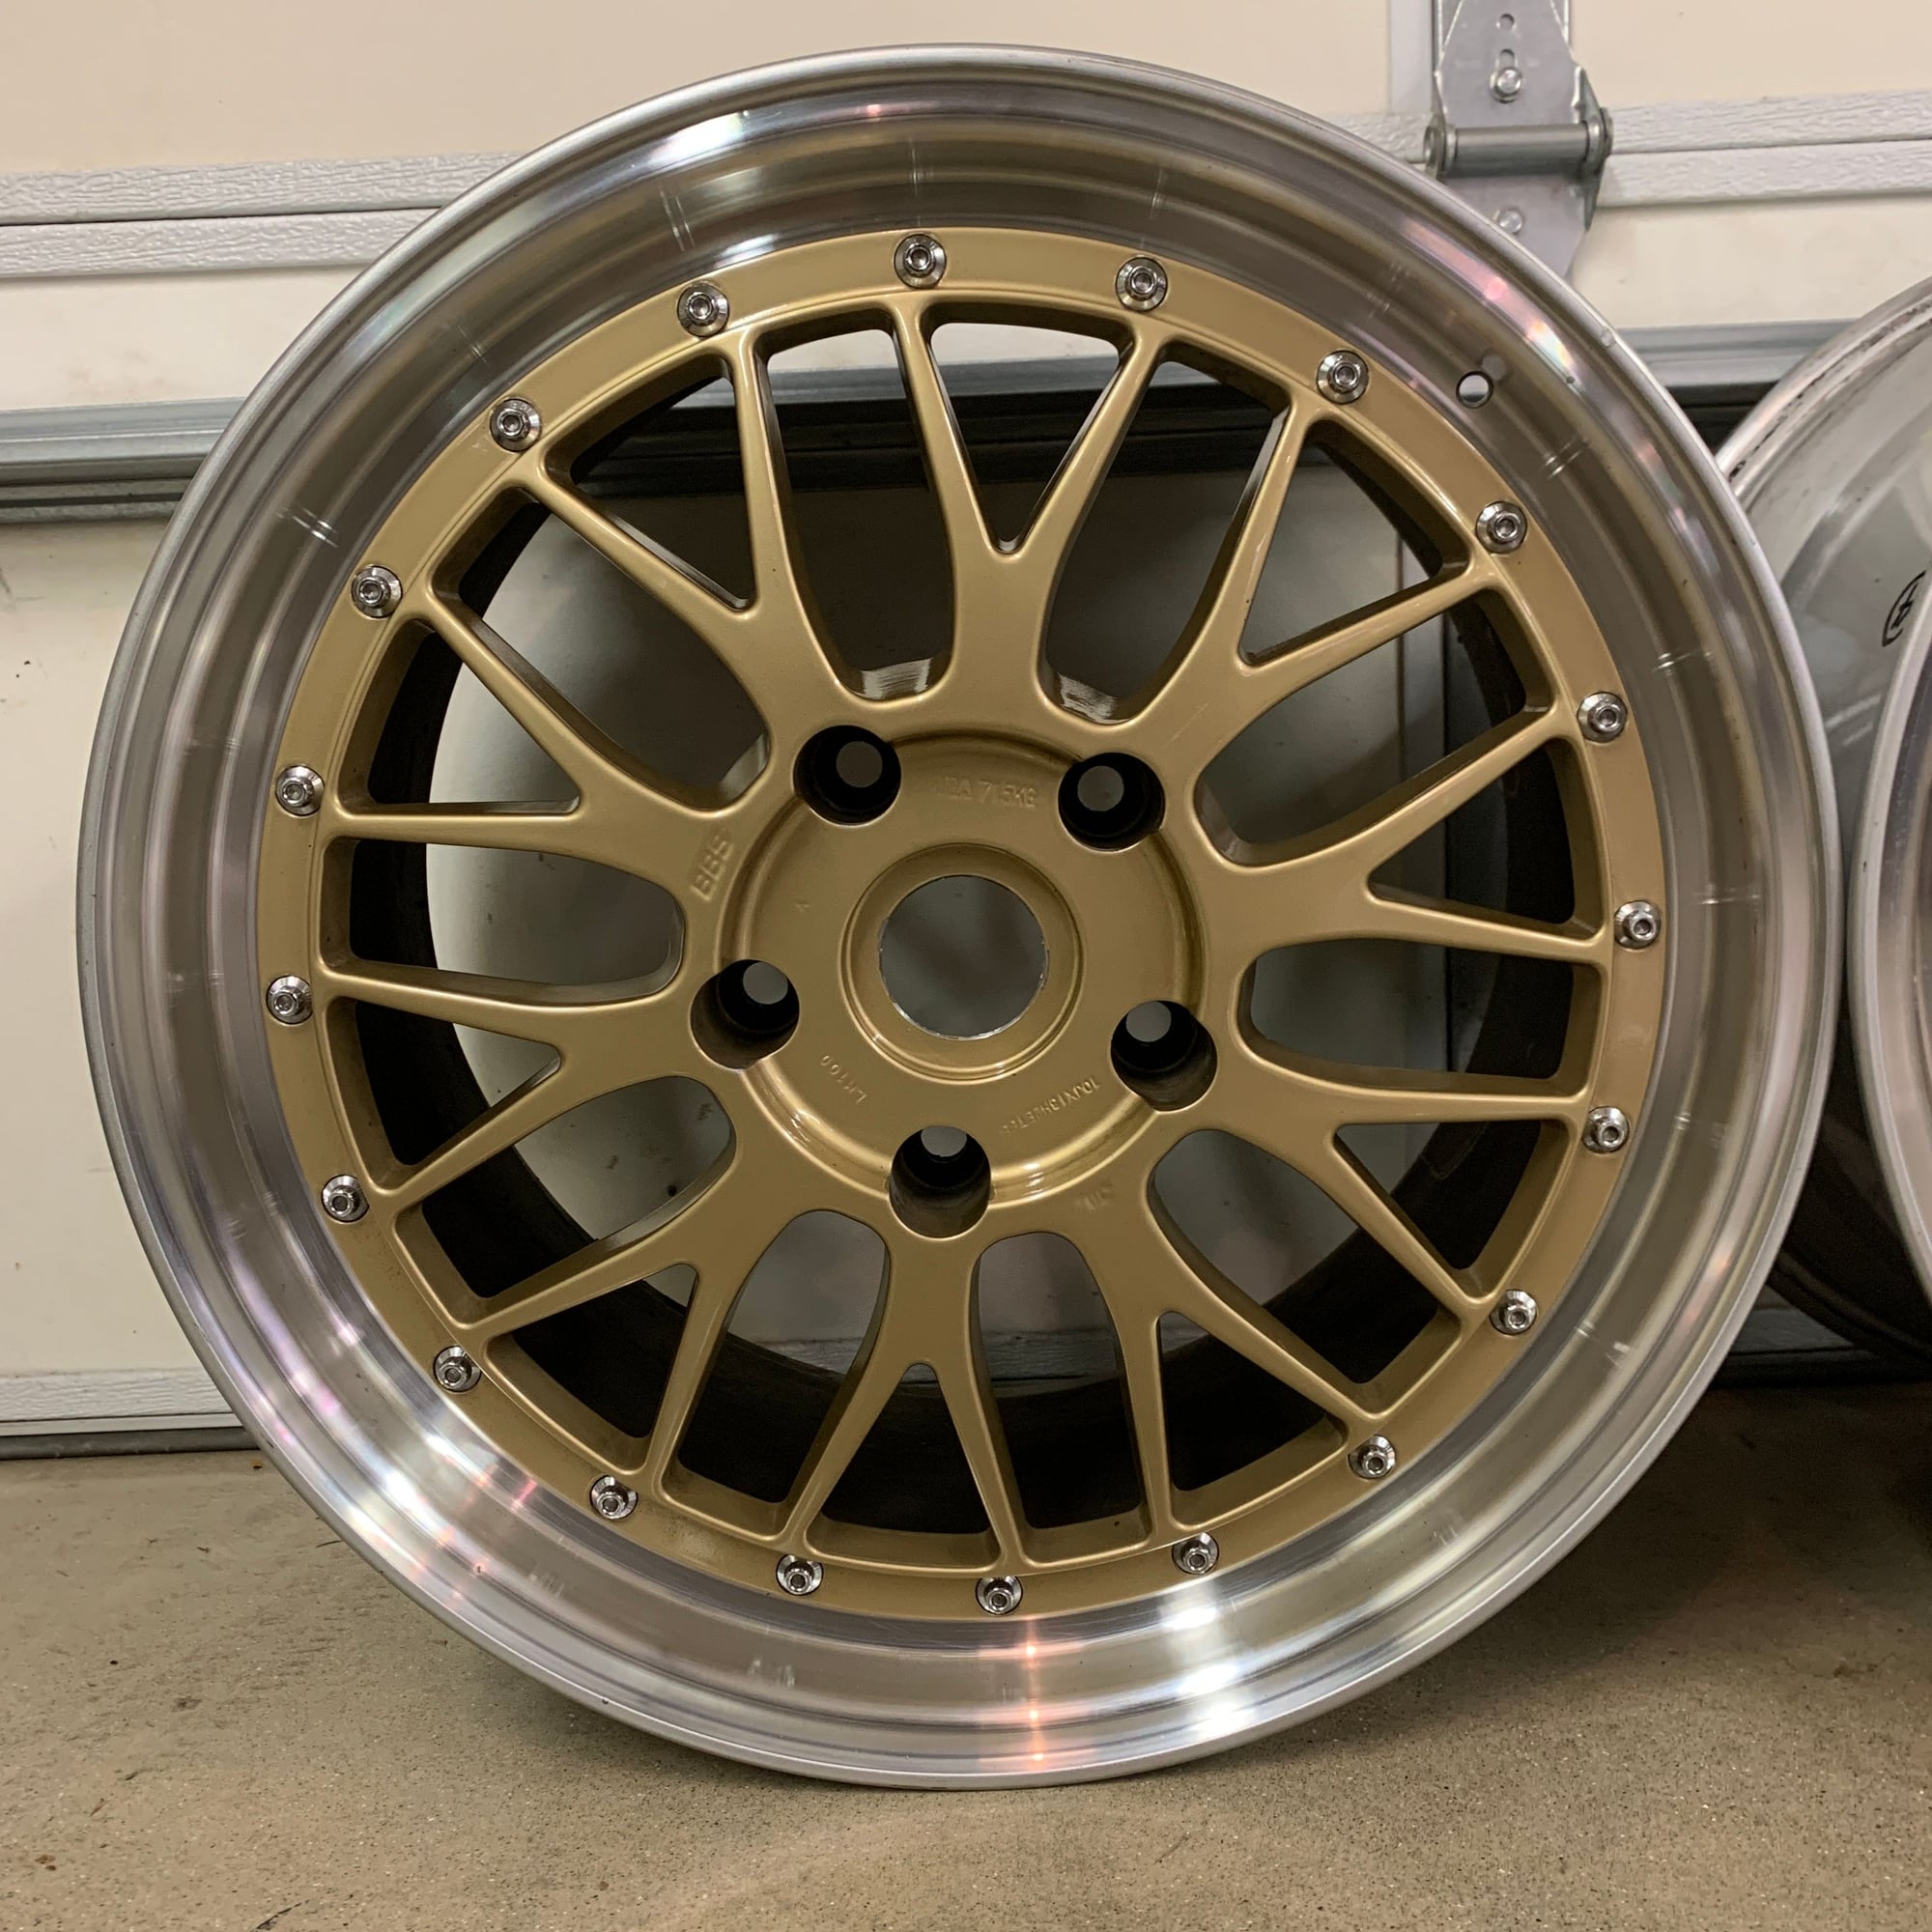 Wheels and Tires/Axles - BBS LM Wheels for sale - Used - Kalamazoo, MI 49071, United States